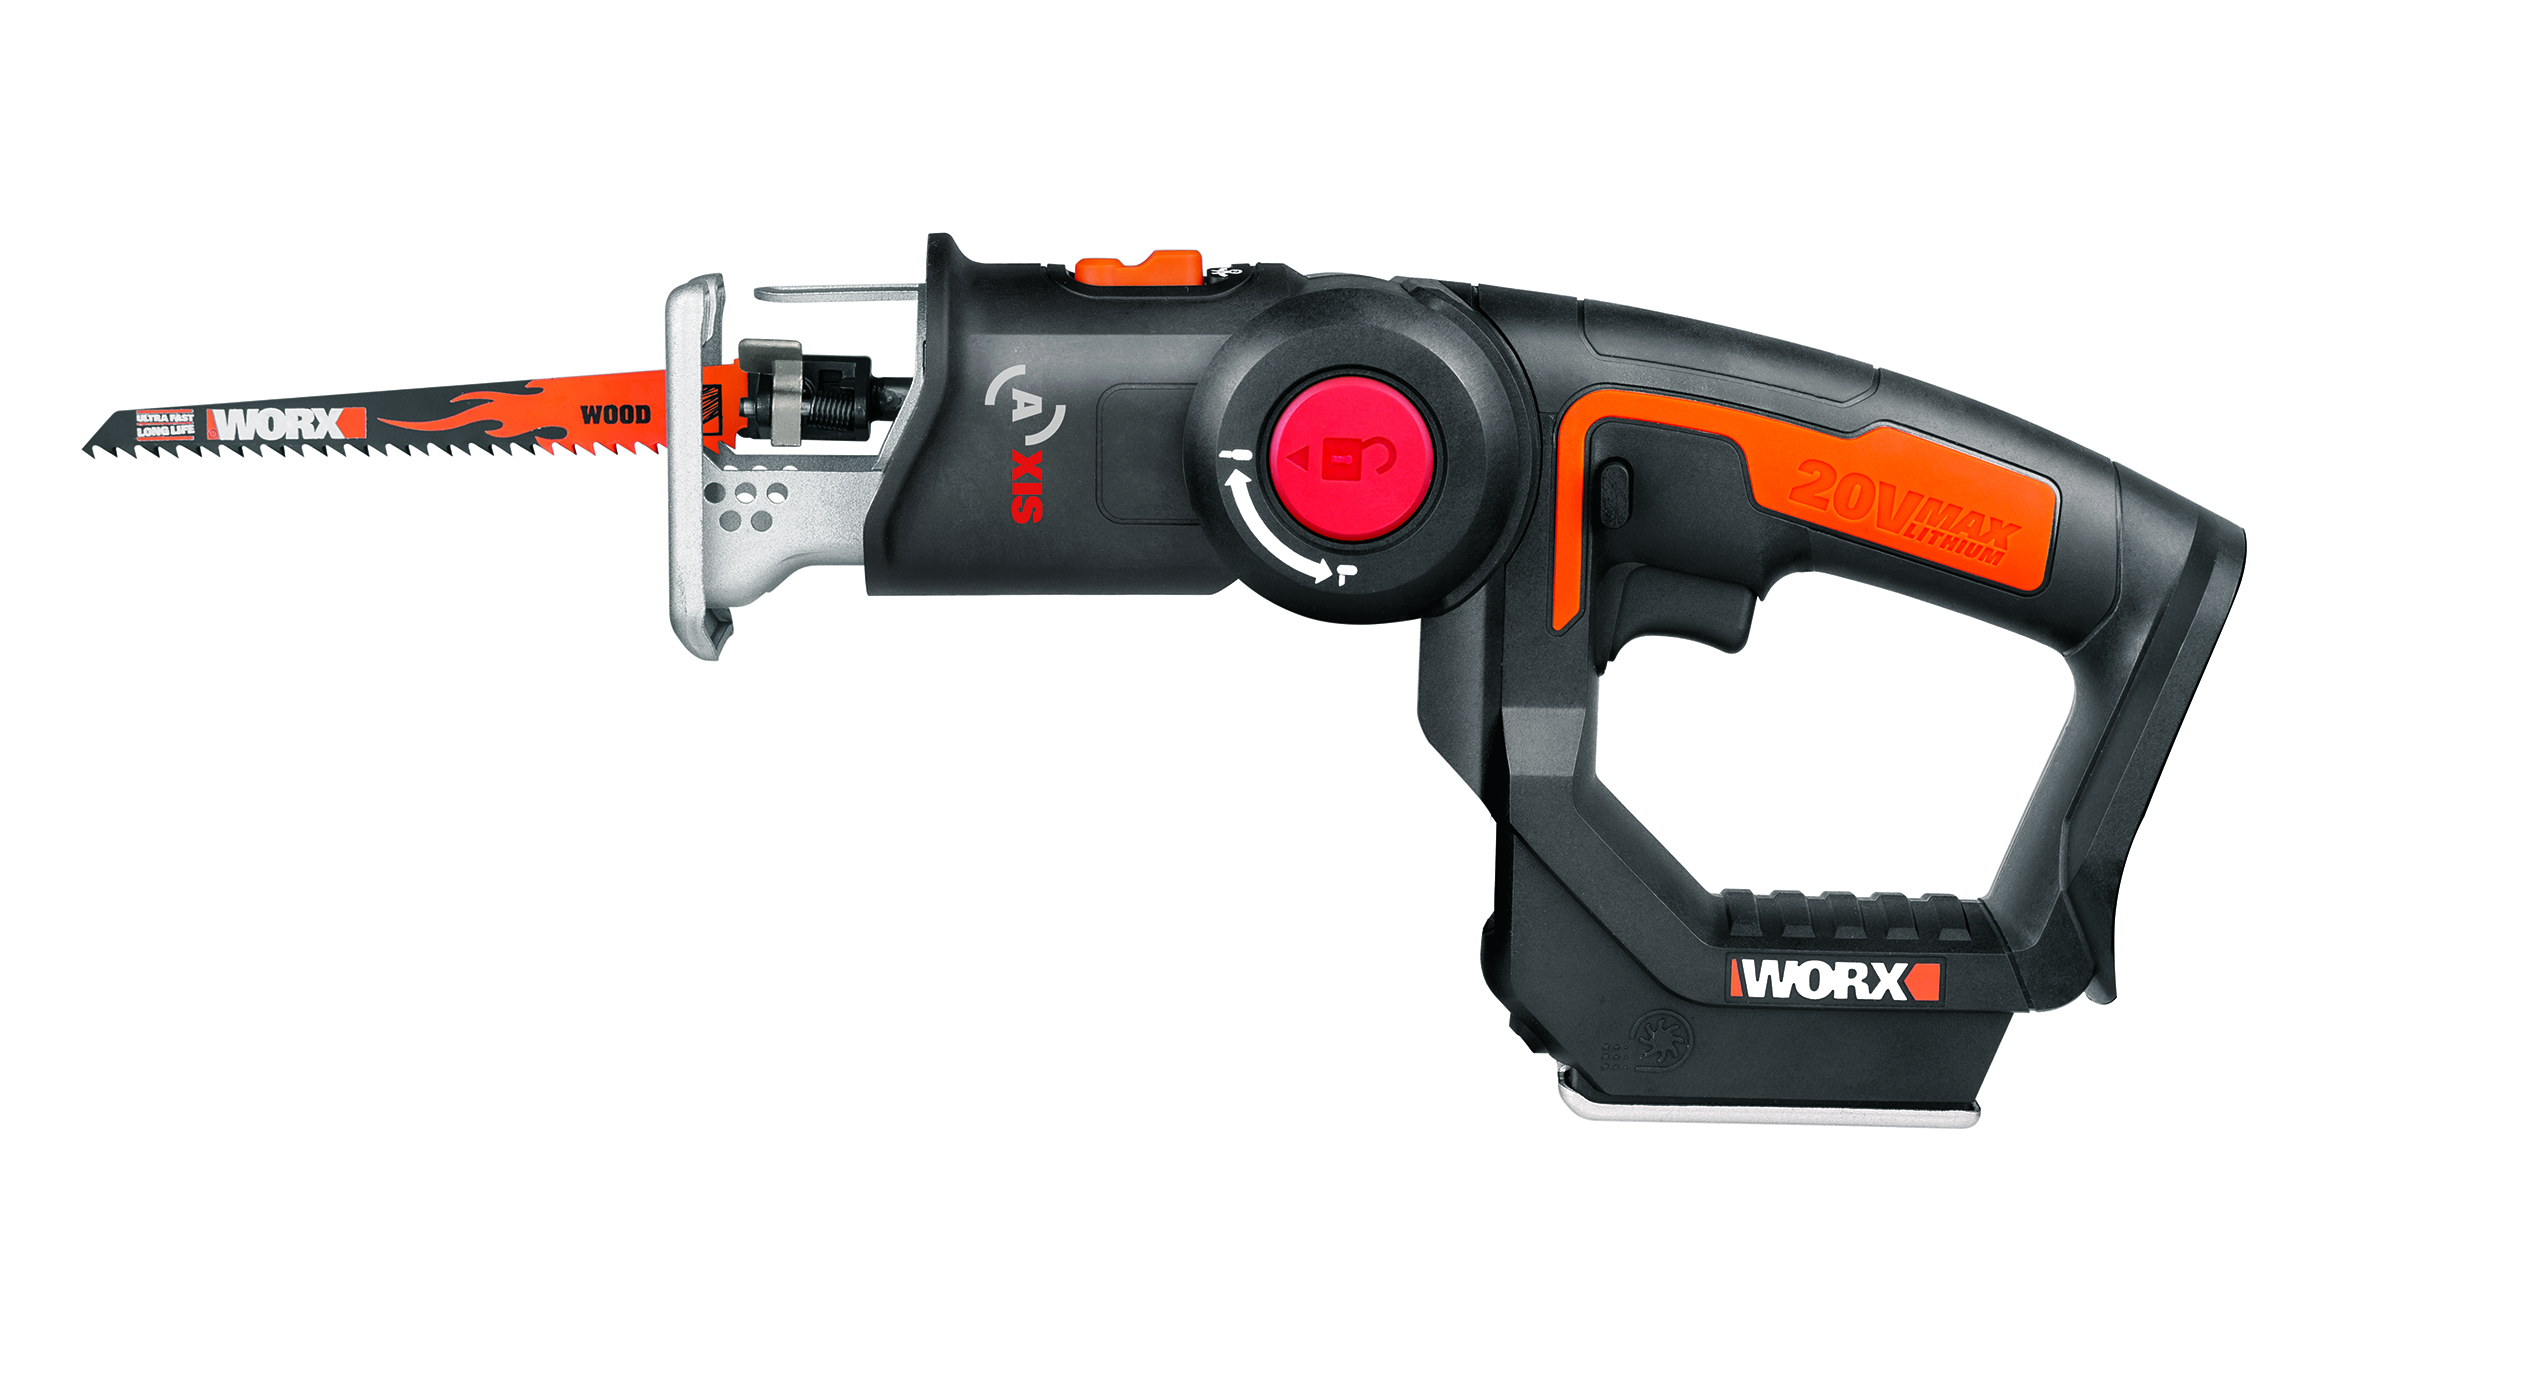 WORX Axis Reciprocating and Jig Saw (WX550L)